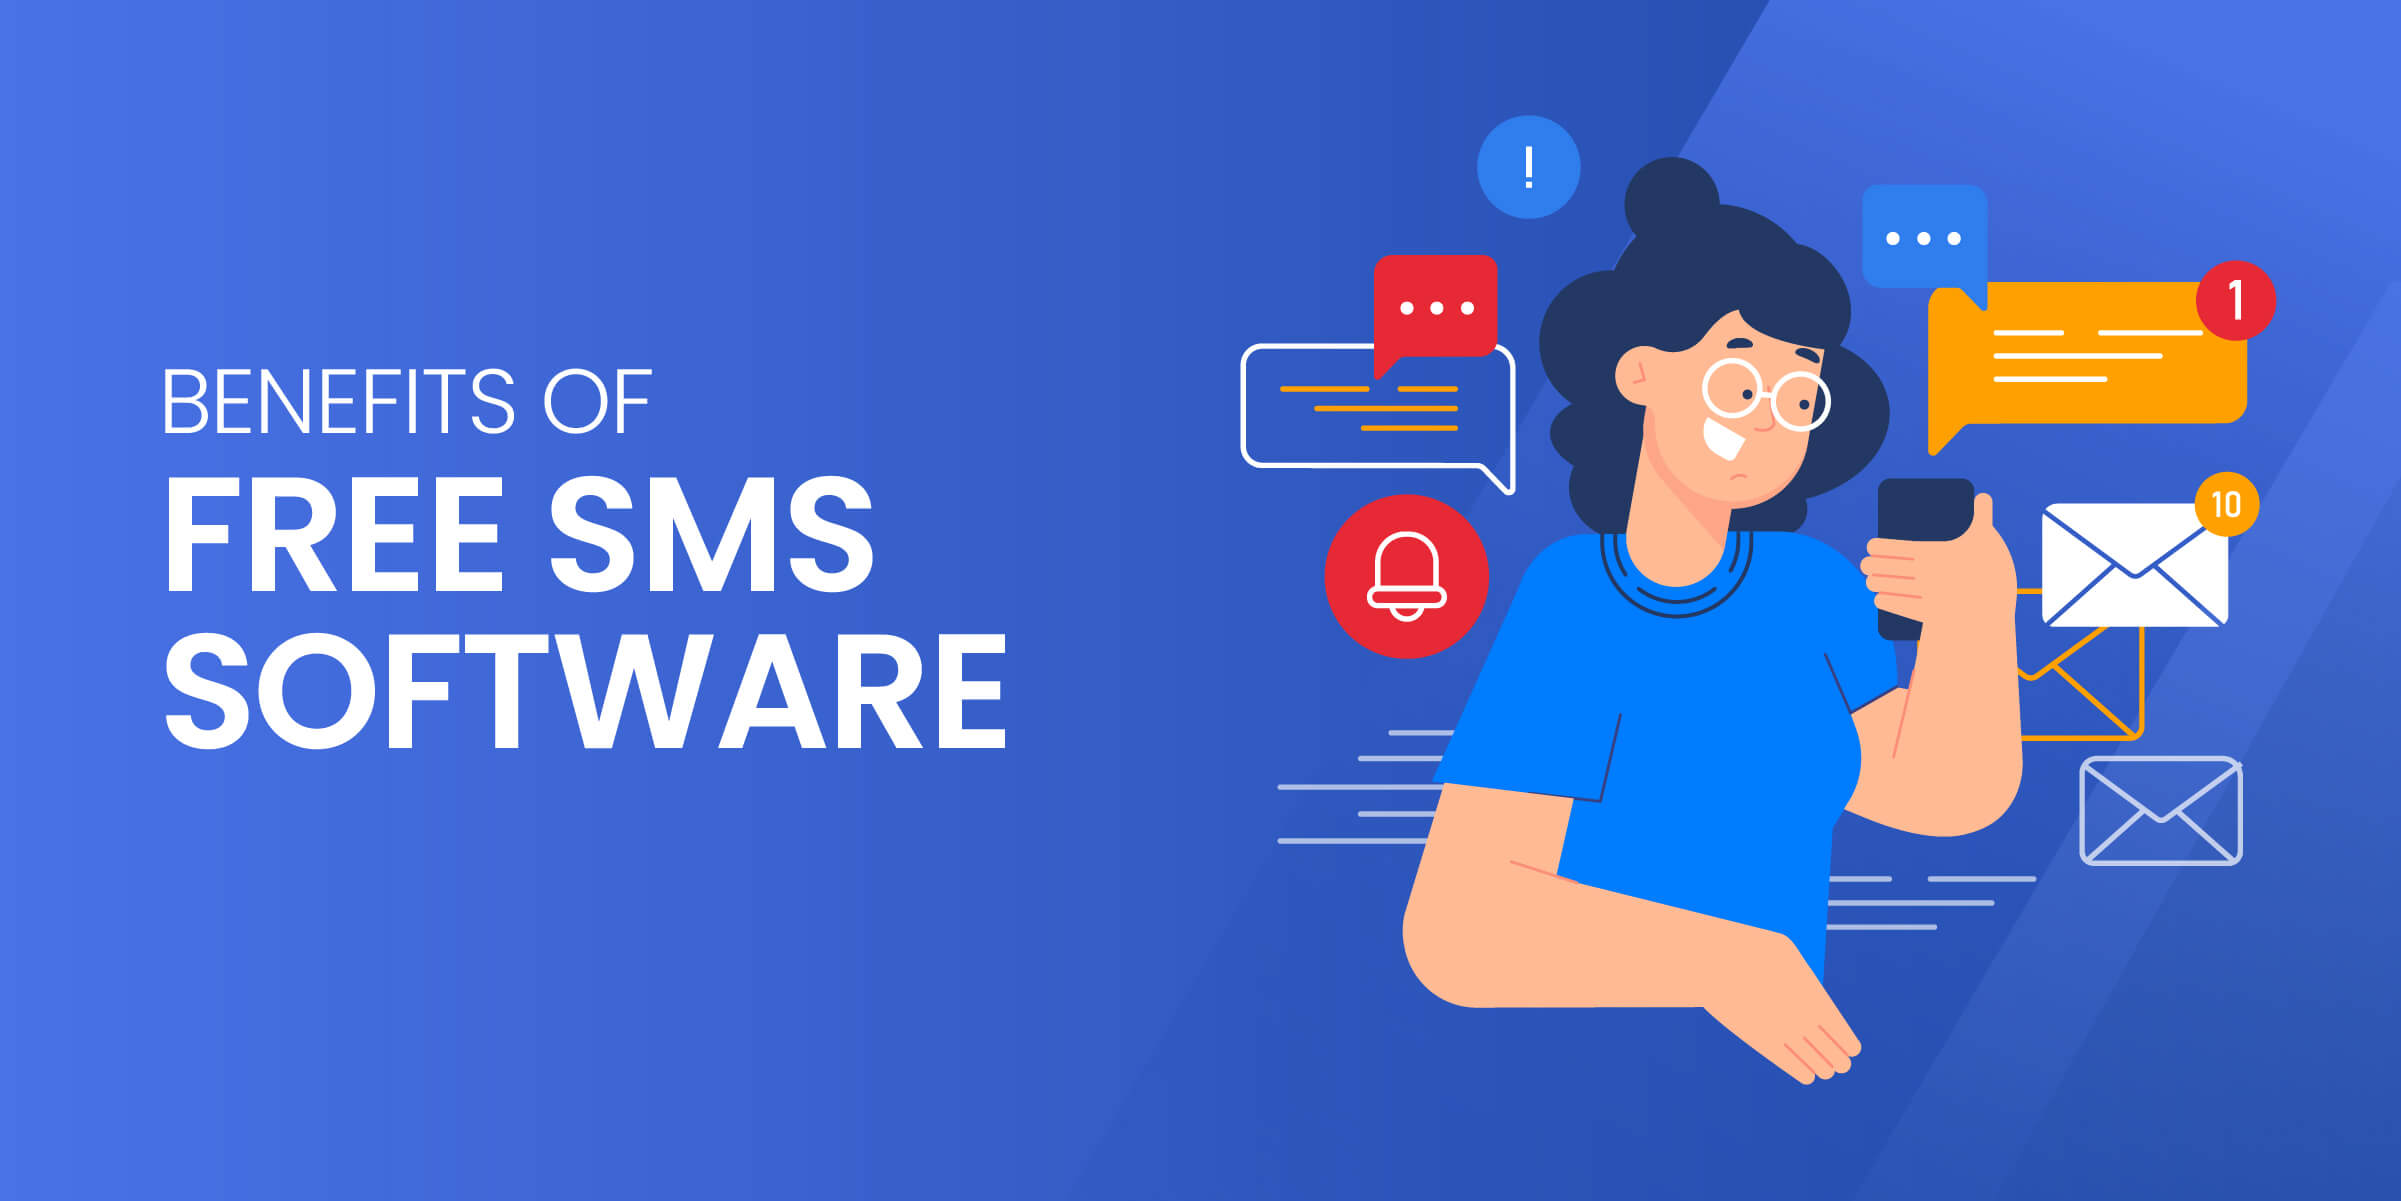 Benefits of Free SMS Software